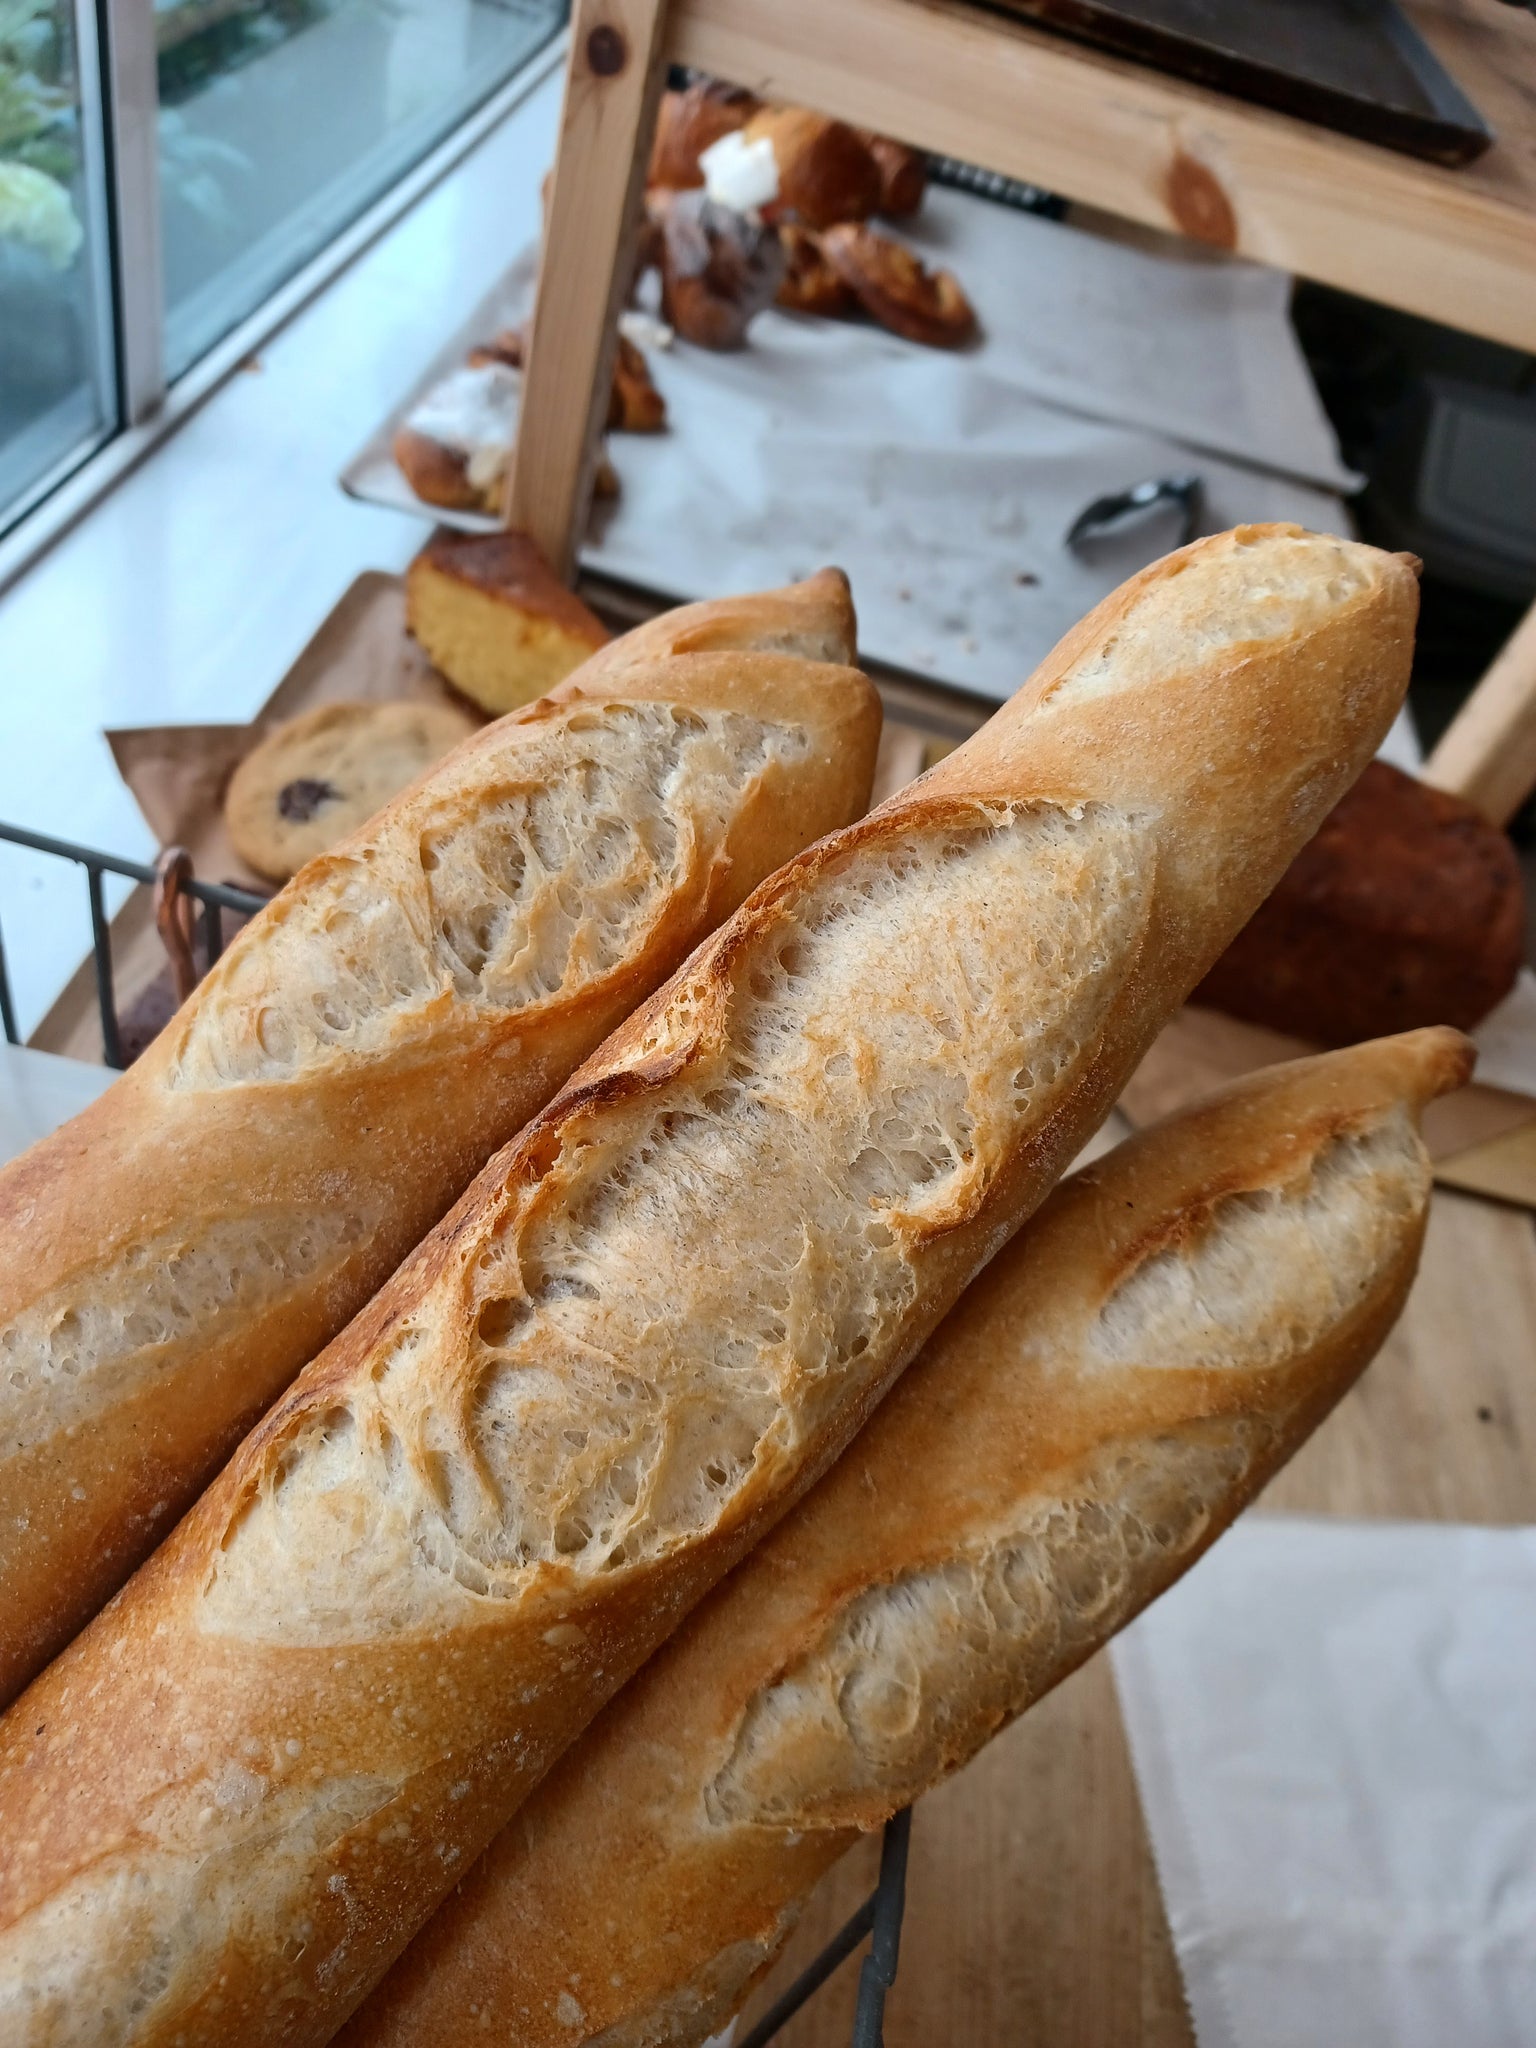 Baguette - Saturday only